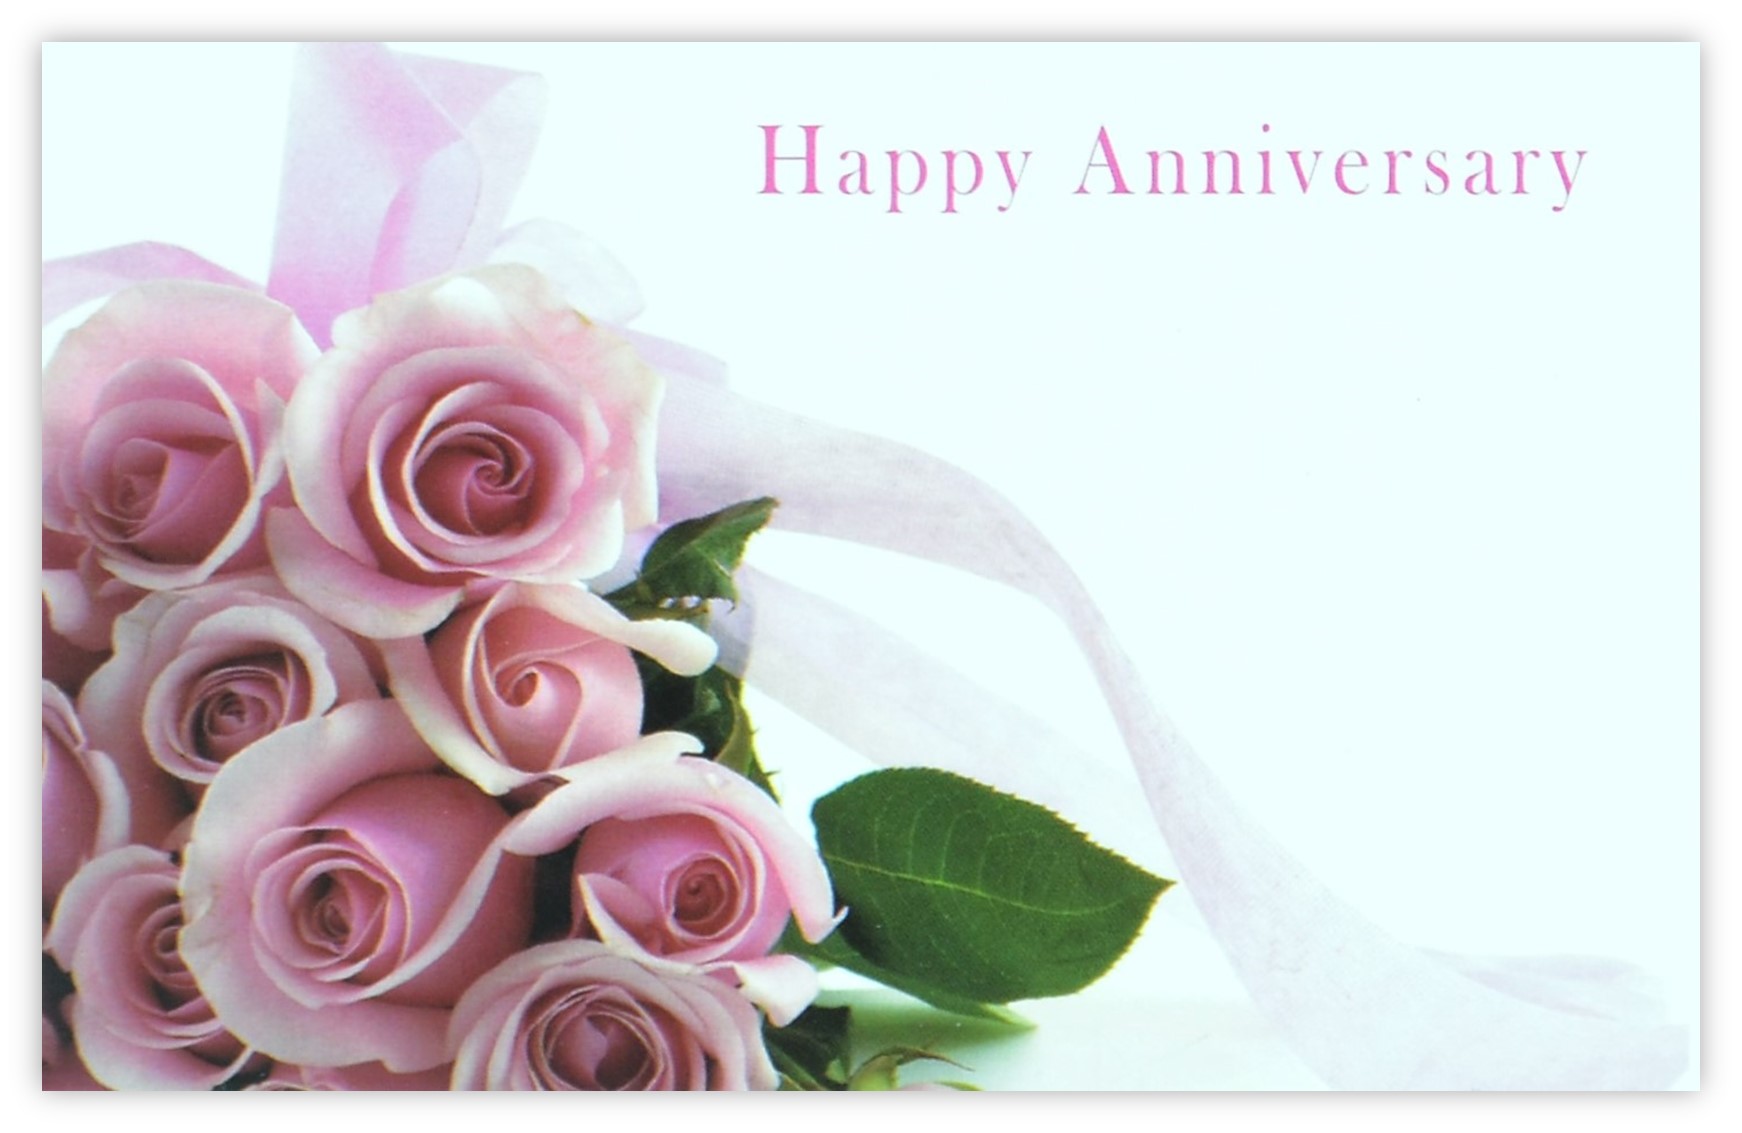 Happy Anniversary (Pink Roses) - 60mm x 90mm Florist Cards - CelloExpress